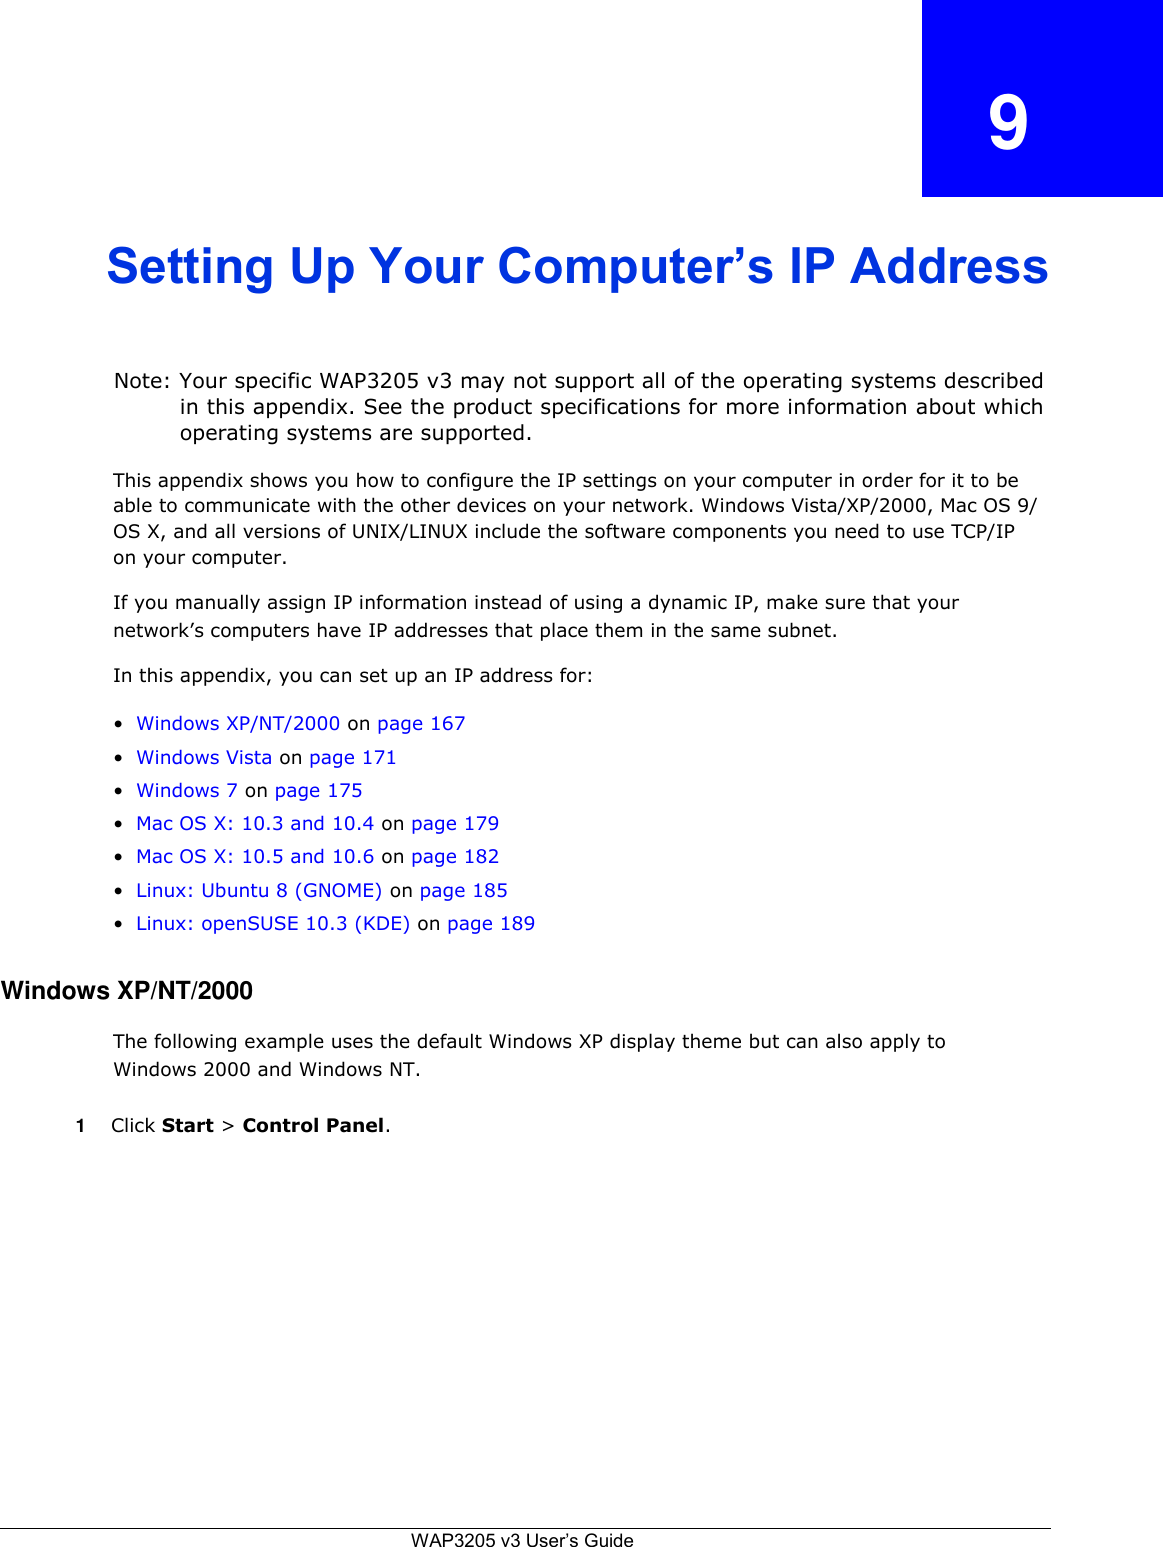  9    Setting Up Your Computer’s IP Address    Note: Your specific WAP3205 v3 may not support all of the operating systems described in this appendix. See the product specifications for more information about which operating systems are supported.  This appendix shows you how to configure the IP settings on your computer in order for it to be able to communicate with the other devices on your network. Windows Vista/XP/2000, Mac OS 9/ OS X, and all versions of UNIX/LINUX include the software components you need to use TCP/IP on your computer.  If you manually assign IP information instead of using a dynamic IP, make sure that your network’s computers have IP addresses that place them in the same subnet.  In this appendix, you can set up an IP address for:  • Windows XP/NT/2000 on page 167  • Windows Vista on page 171  • Windows 7 on page 175  • Mac OS X: 10.3 and 10.4 on page 179  • Mac OS X: 10.5 and 10.6 on page 182  • Linux: Ubuntu 8 (GNOME) on page 185  • Linux: openSUSE 10.3 (KDE) on page 189   Windows XP/NT/2000  The following example uses the default Windows XP display theme but can also apply to Windows 2000 and Windows NT.  1 Click Start &gt; Control Panel.                   WAP3205 v3 User’s Guide 